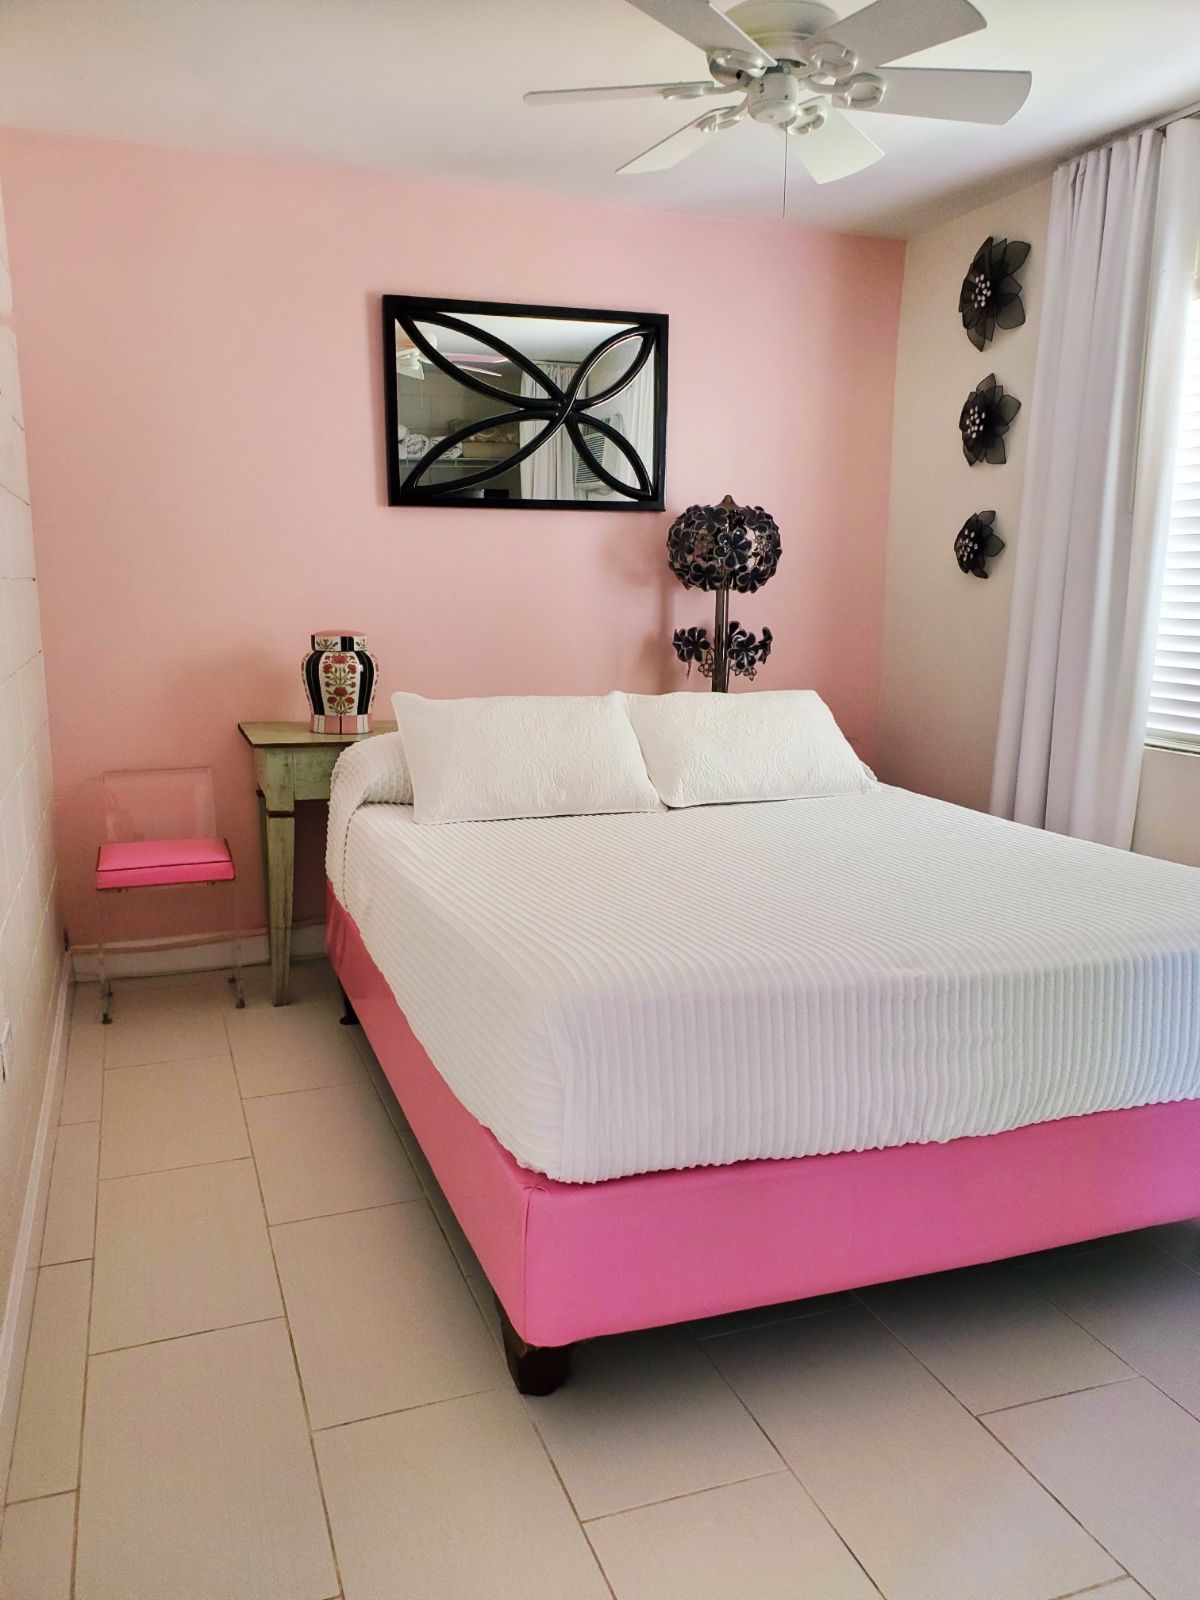 South Beach Place Pink Lady bedroom with its clever use of a console behind the bed, as headboard and for nightstand-type utility